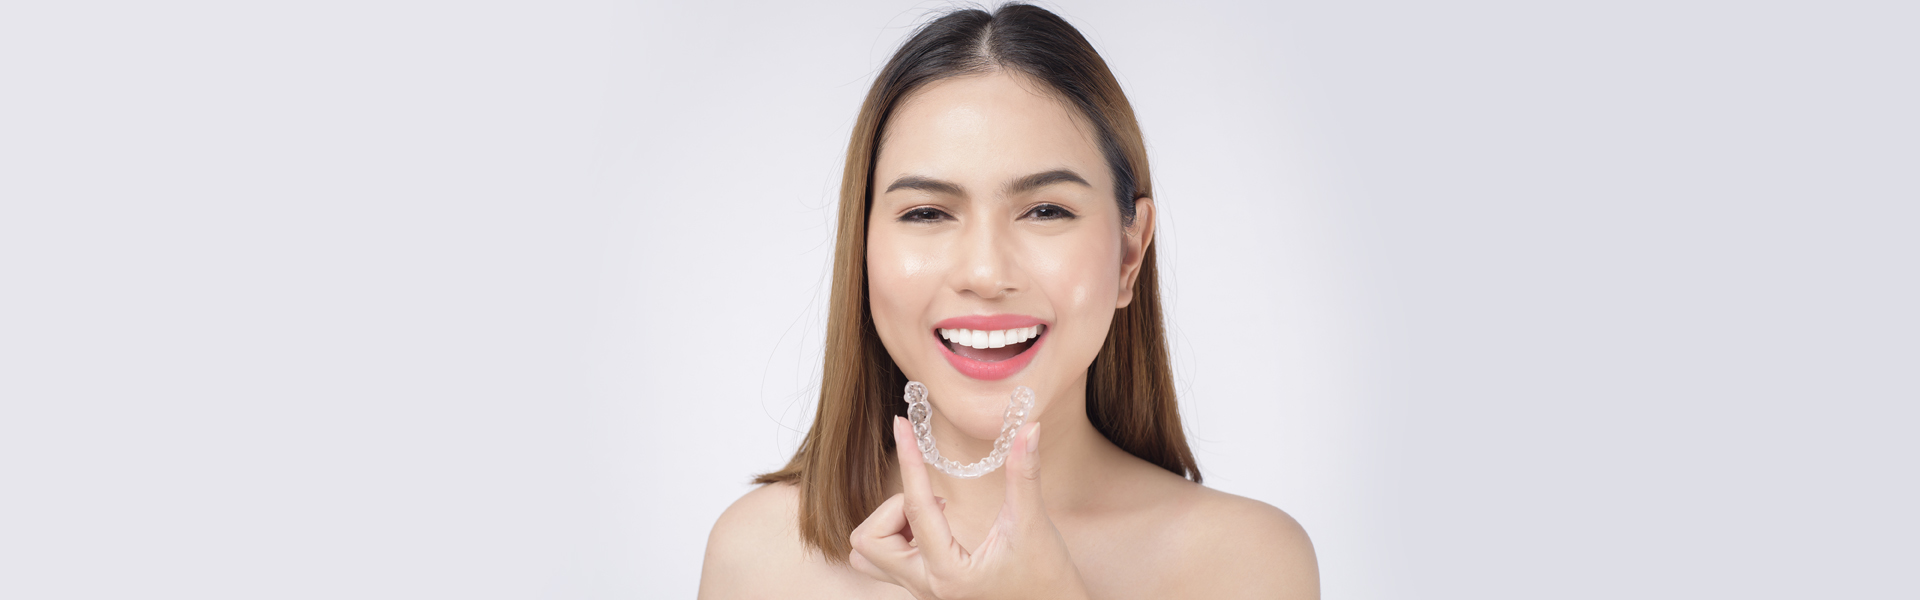 Does Invisalign Change Your Face Shape?